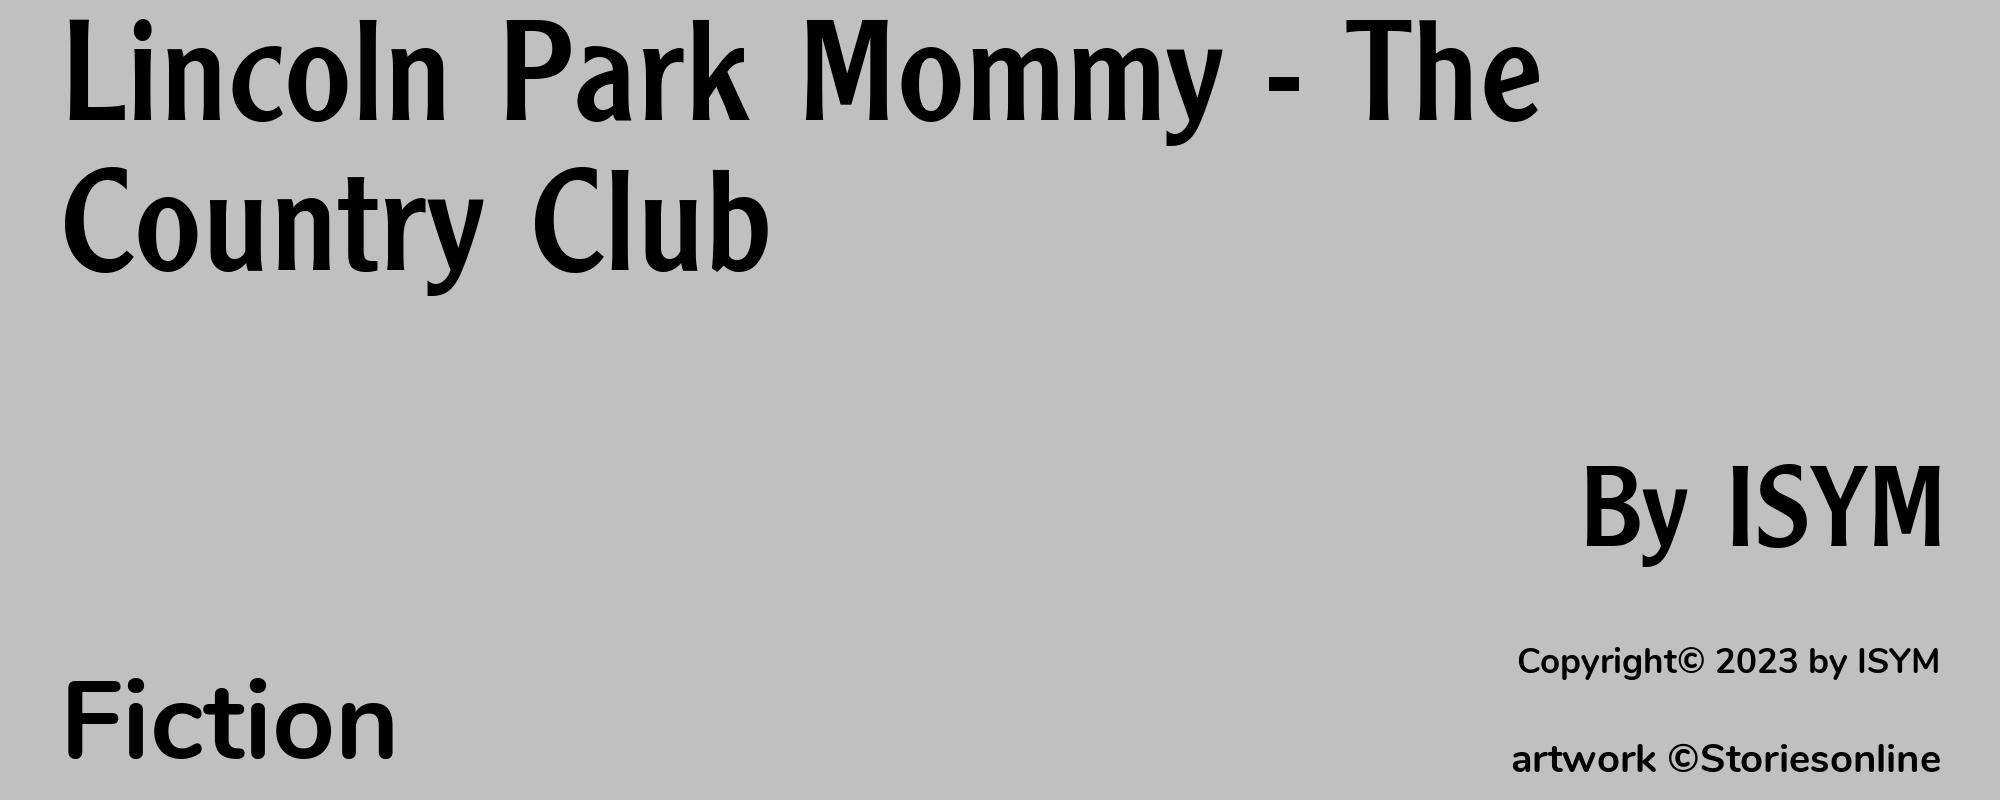 Lincoln Park Mommy - The Country Club - Cover